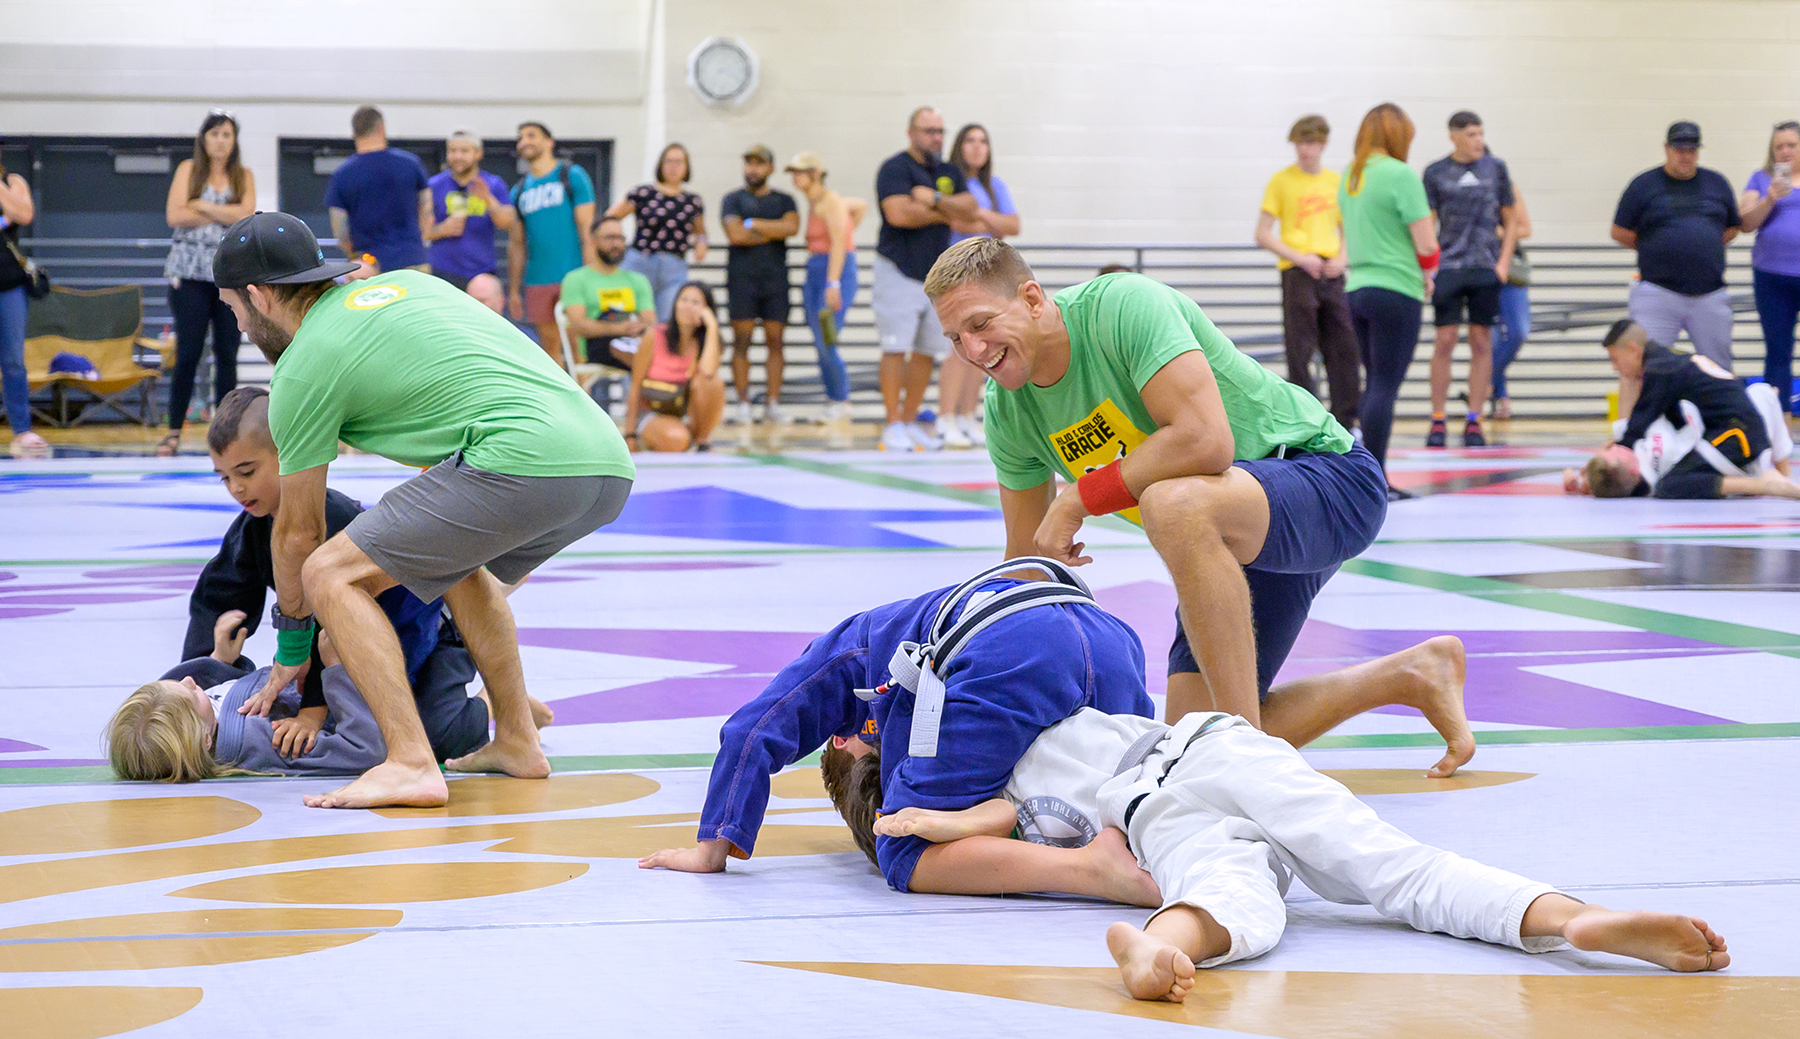 An image of two boys during a Jiu-Jitsu competition named "Easton Open", which is for all Easton martial arts academies in the state of Colorado.